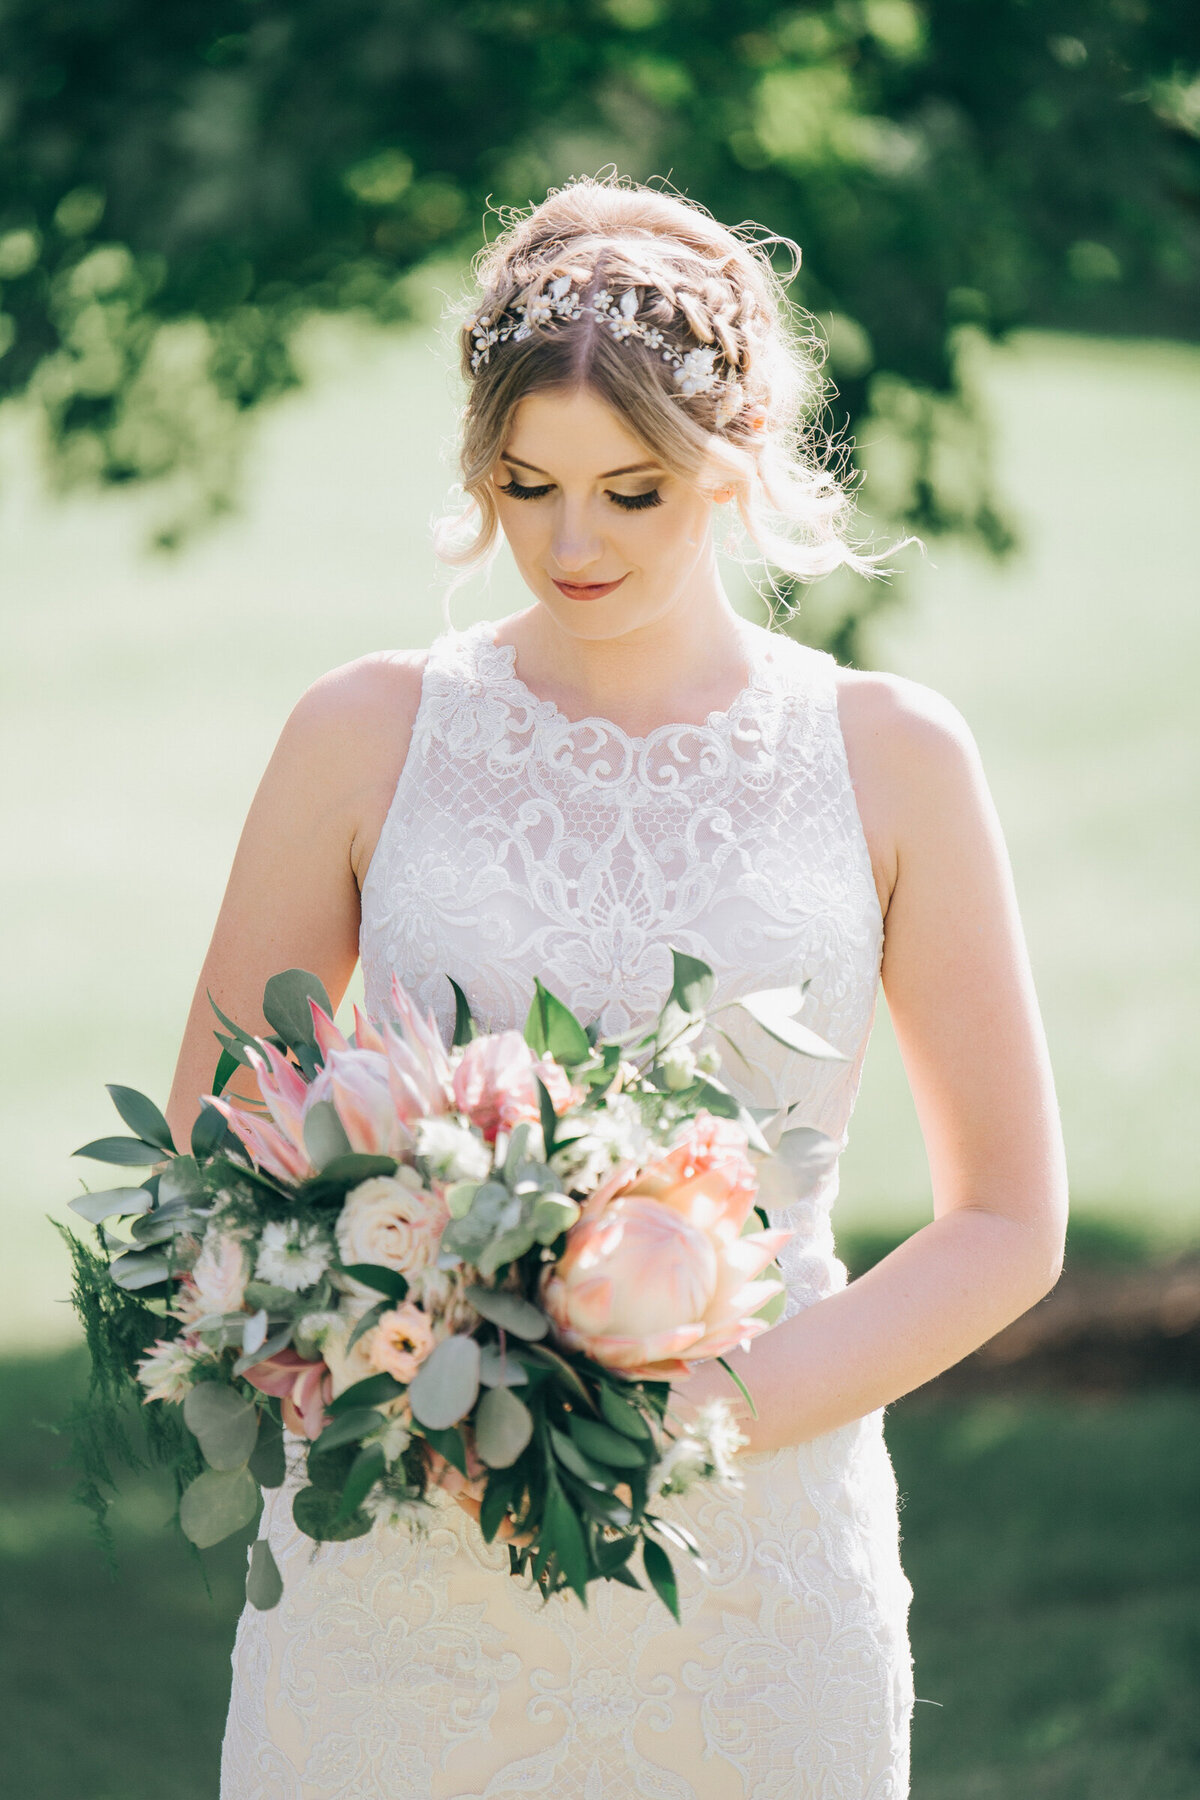 A bride wearing a high neck wedding dress with lace accents looking down at her whimsical blush and green wedding bouquet